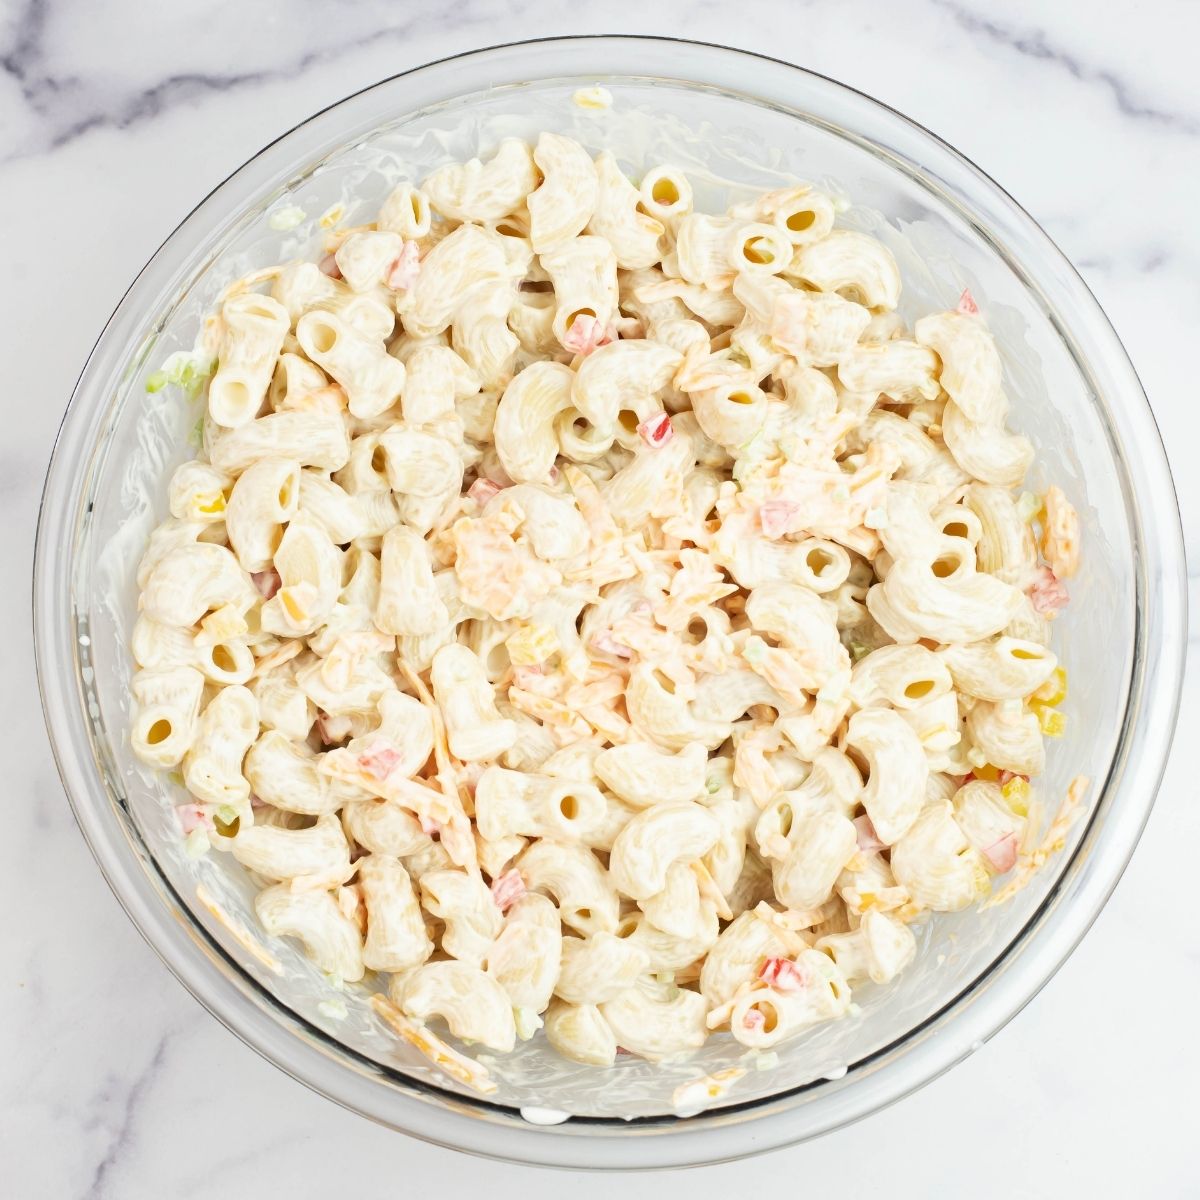 A large bowl filled with Sour Cream Cheddar Pasta Salad.